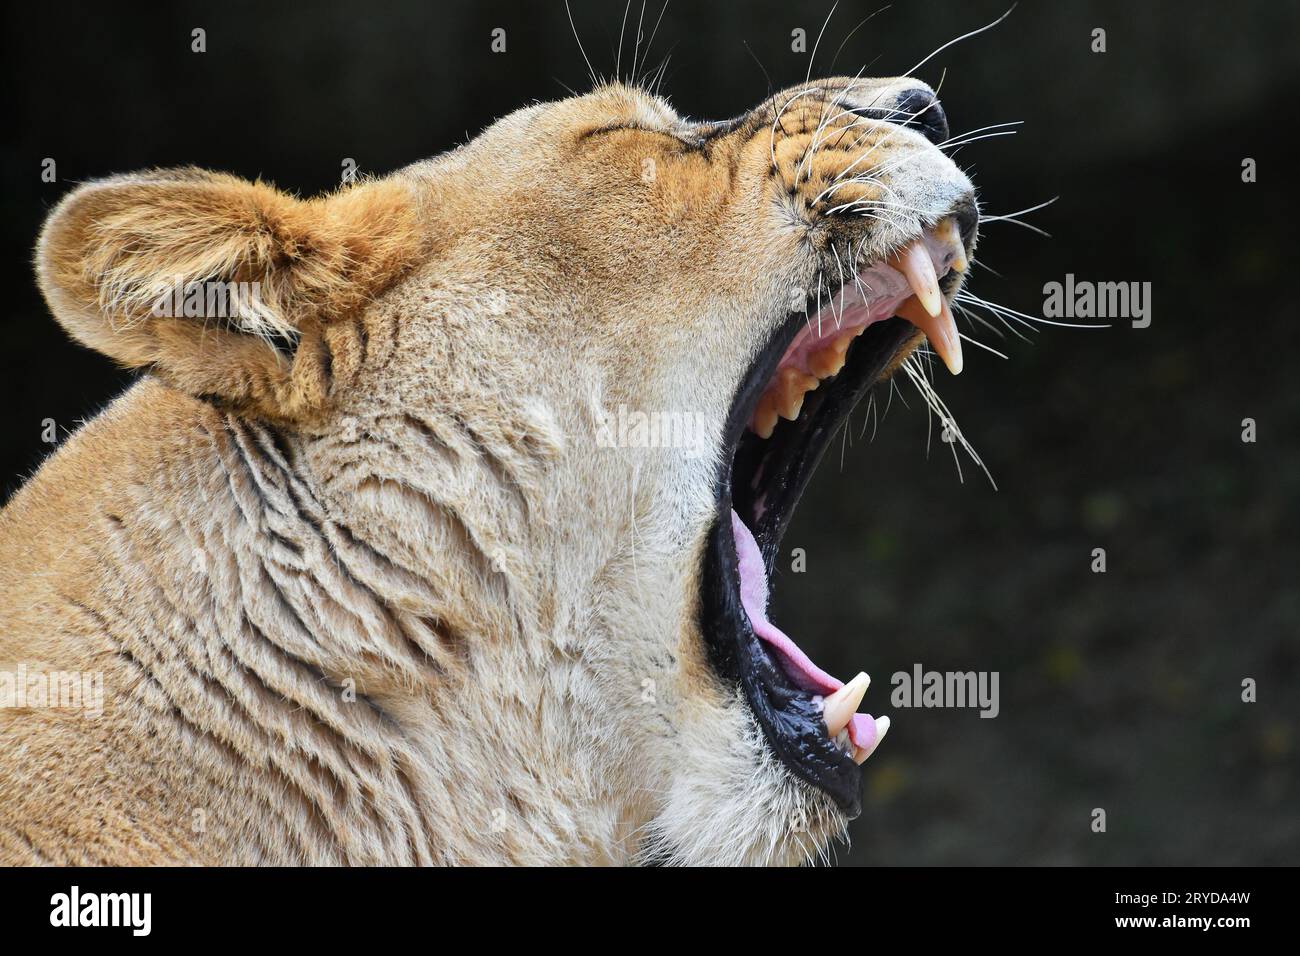 Close up side portrait of lioness yawning Stock Photo